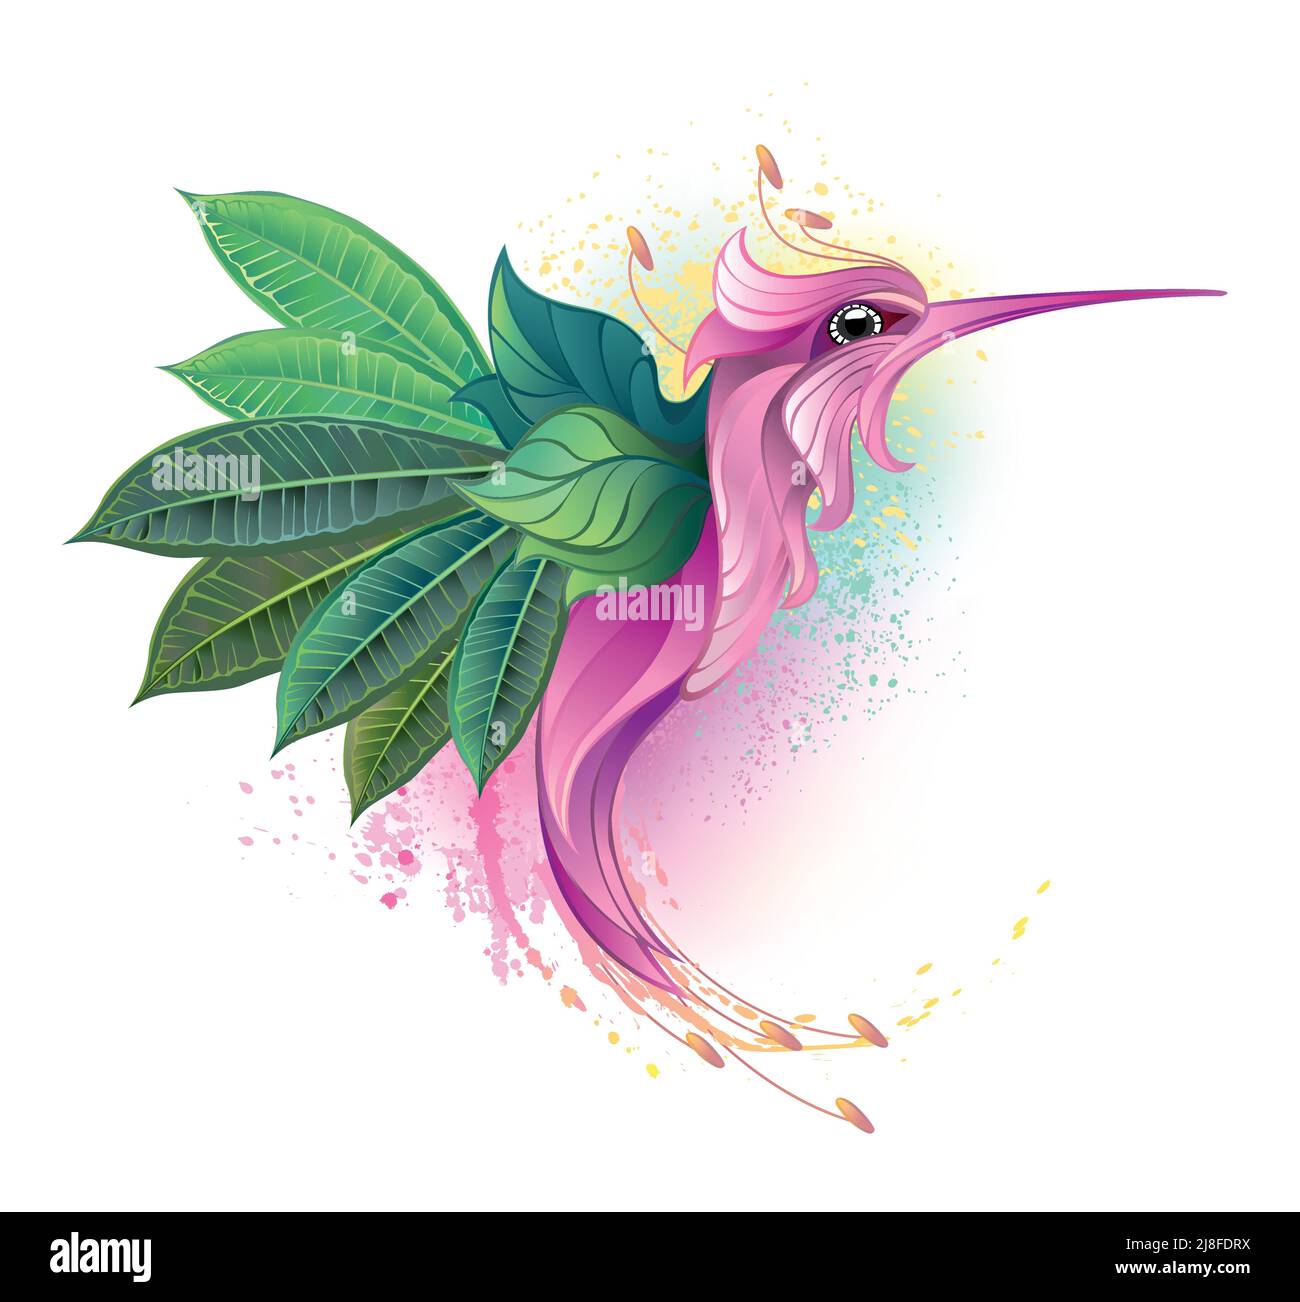 Artistically drawn, fictional hummingbird made from pink flower and with wings made from green, detailed plumeria leaves. Stock Vector